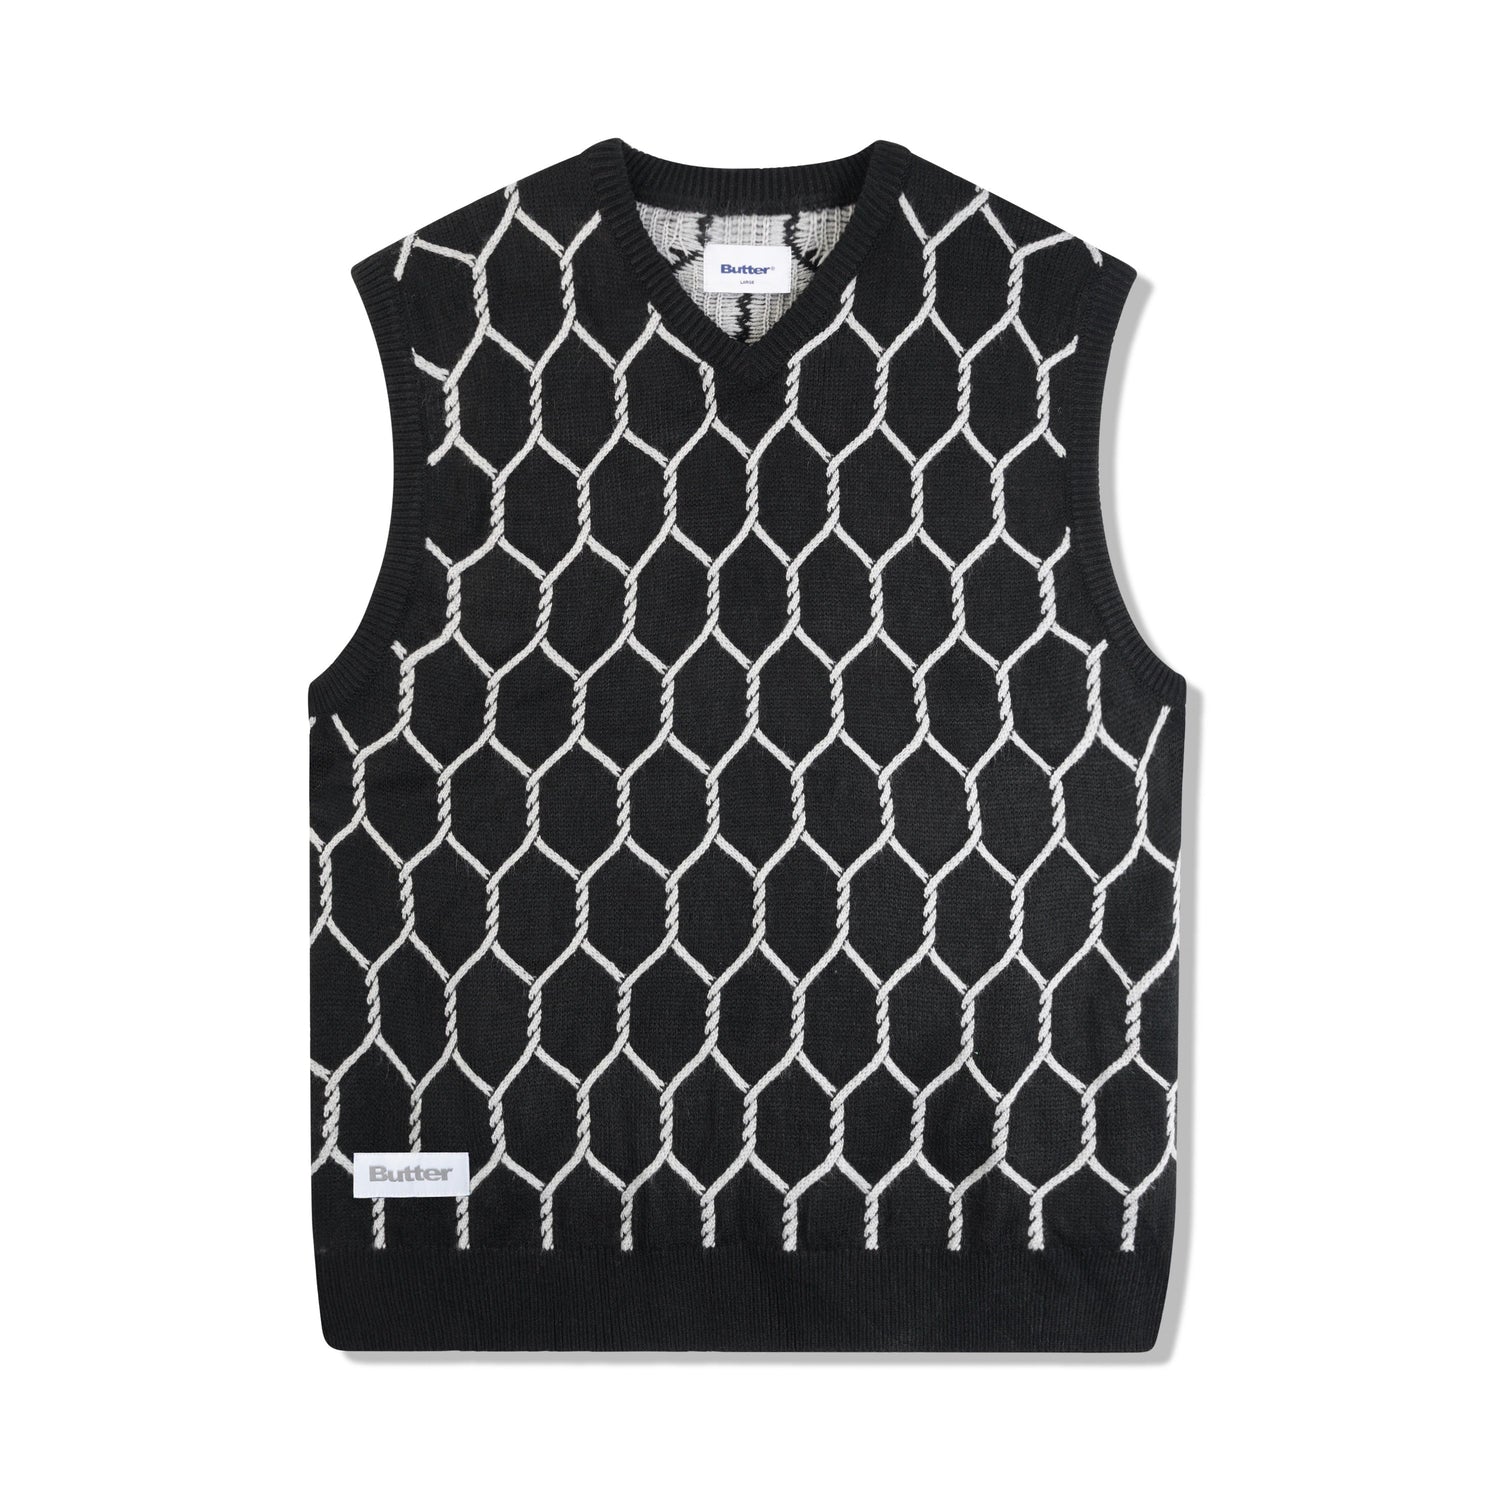 Chain Link Knitted Vest, Black